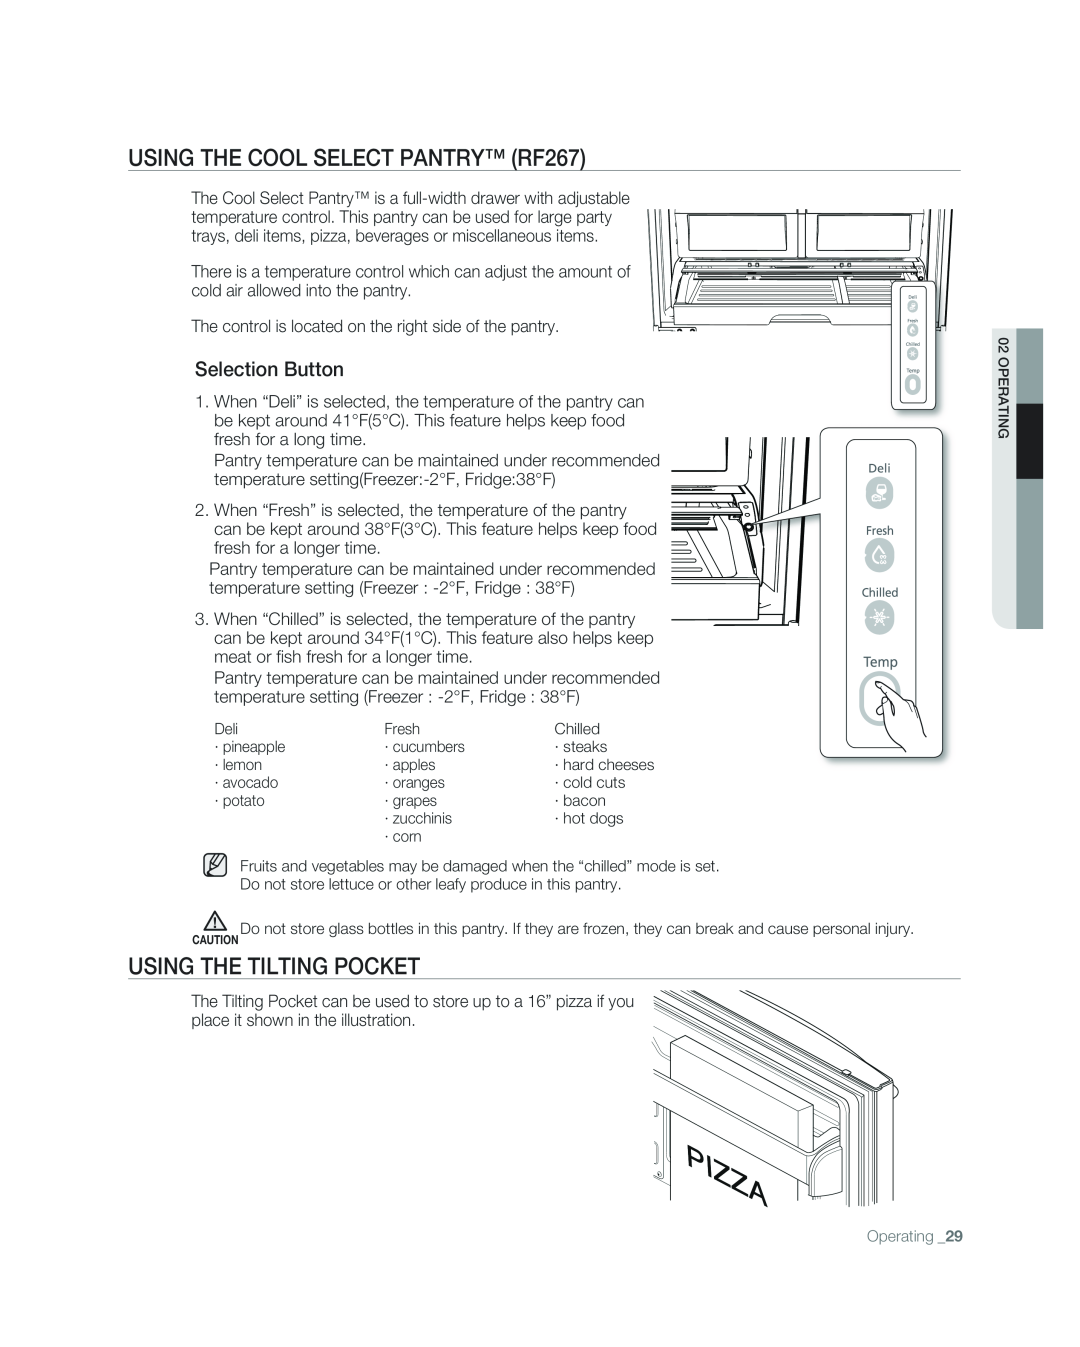 Samsung RF267ABPN user manual USING THE COOL SELECT PANTRY RF267, USING the tilting pocket, Selection Button 